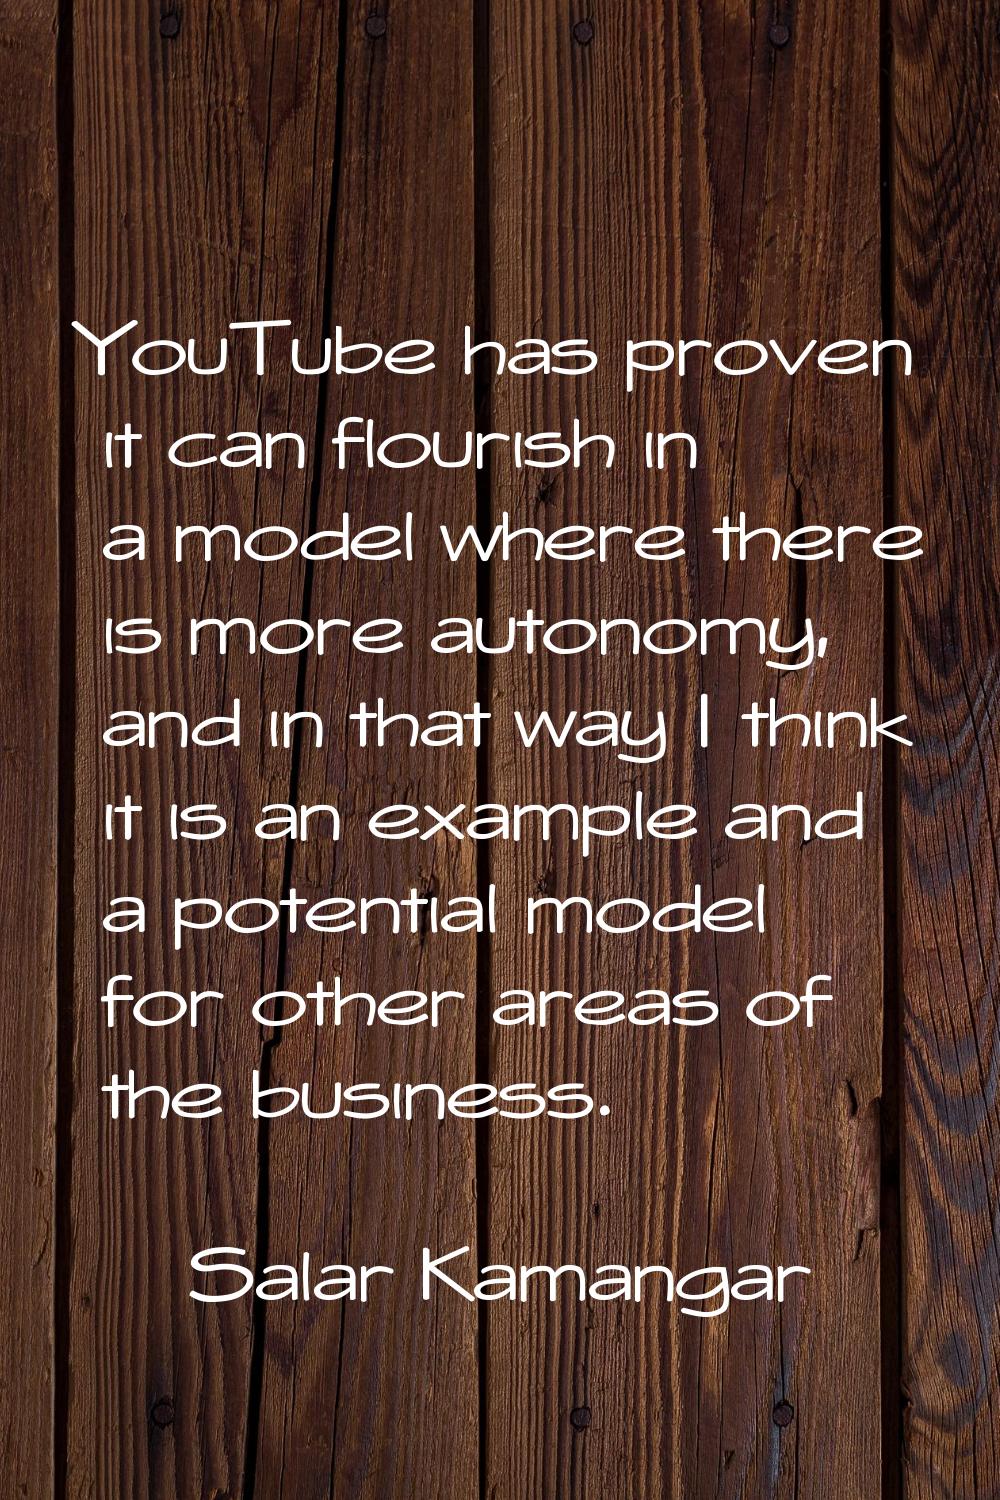 YouTube has proven it can flourish in a model where there is more autonomy, and in that way I think